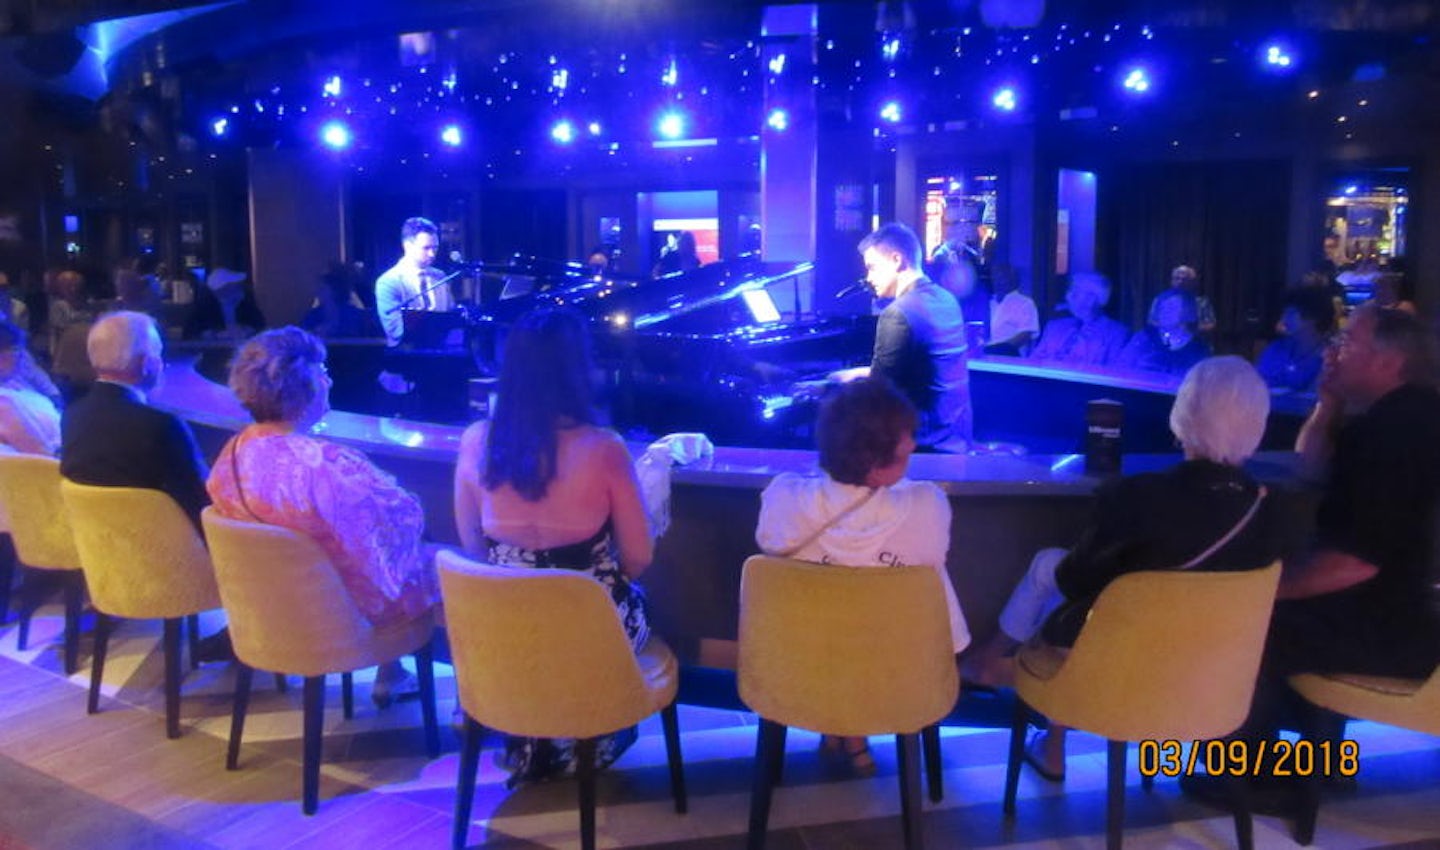 The new piano lounge opposite the casino. The two guys were very talented.